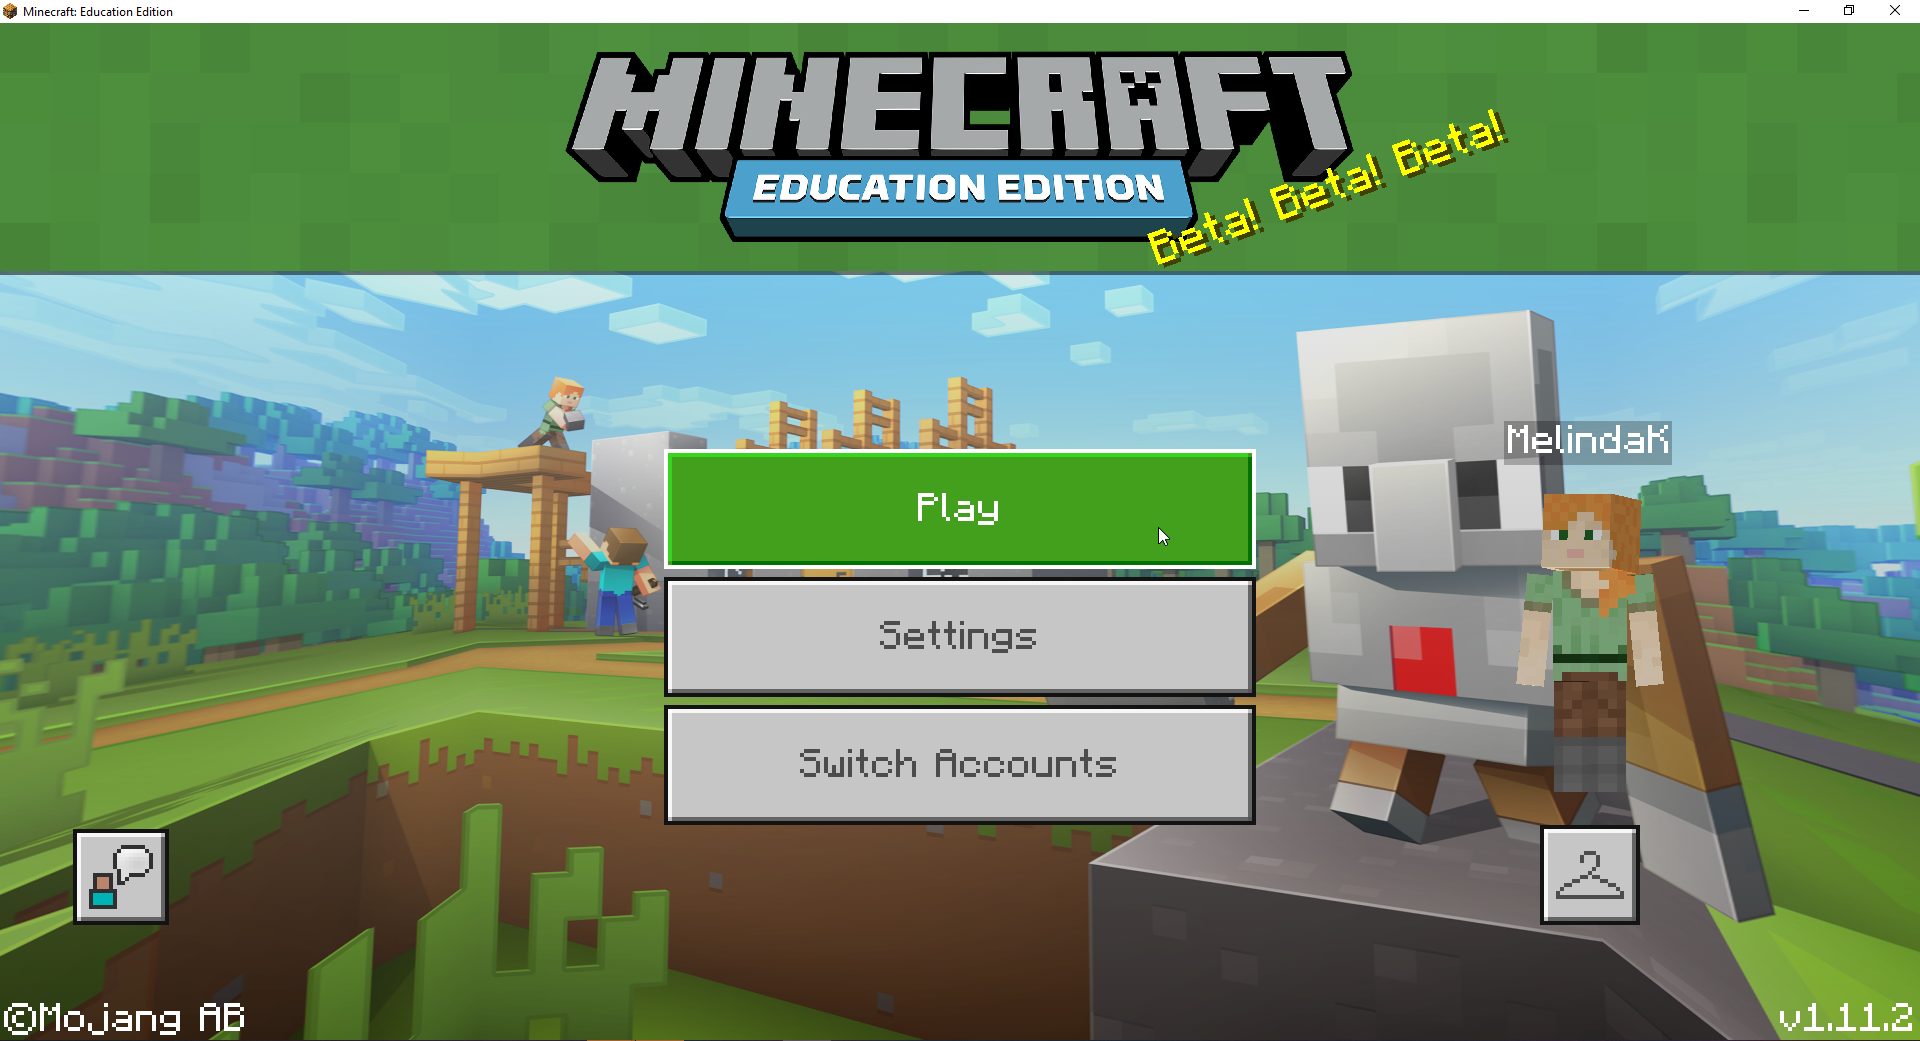 How To Set Up A Multiplayer Game, How To Make Custom Bed In Minecraft Education Edition